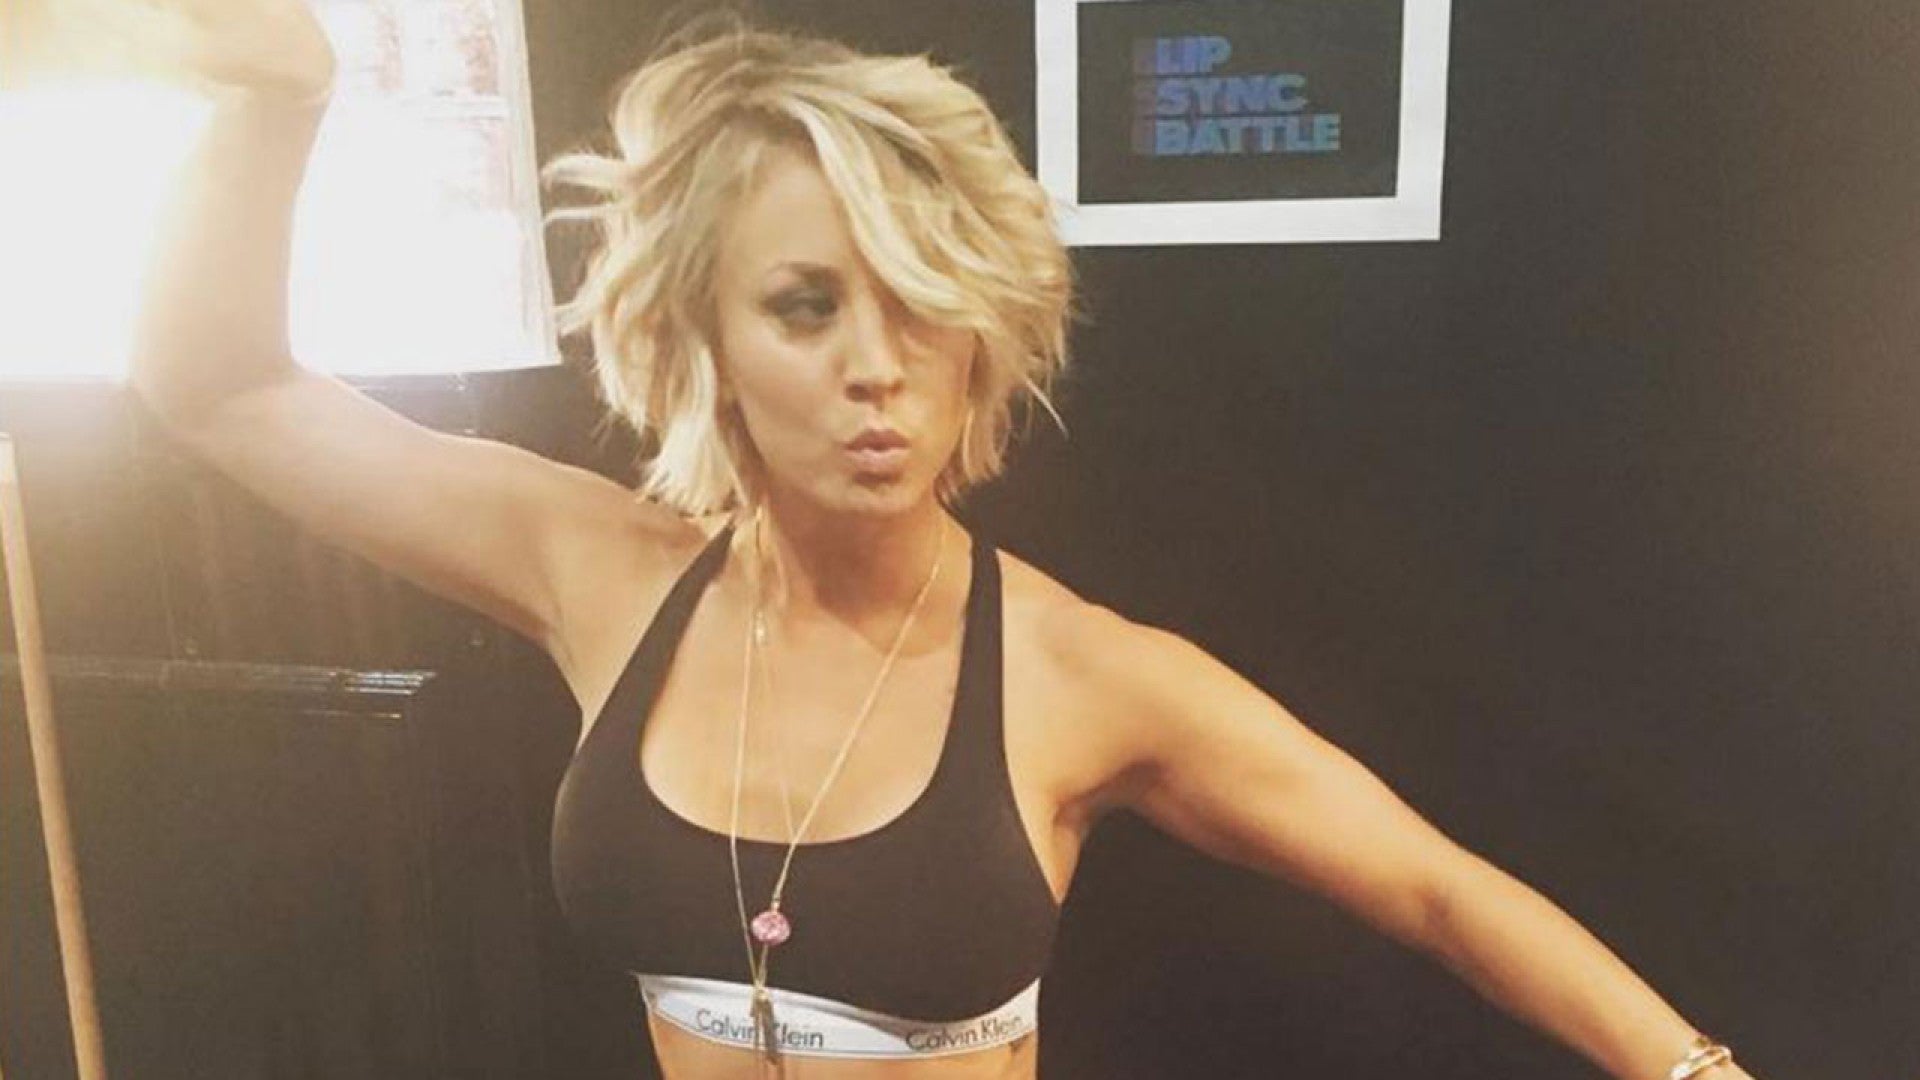 Kaley Cuoco Shows Off Her Killer Abs And Looks Super Sexy In A Calvin Klein Bra Top Entertainment Tonight Born november 30, 1985) is an american actress and producer. kaley cuoco bares her toned bod in a bra and cut off shorts